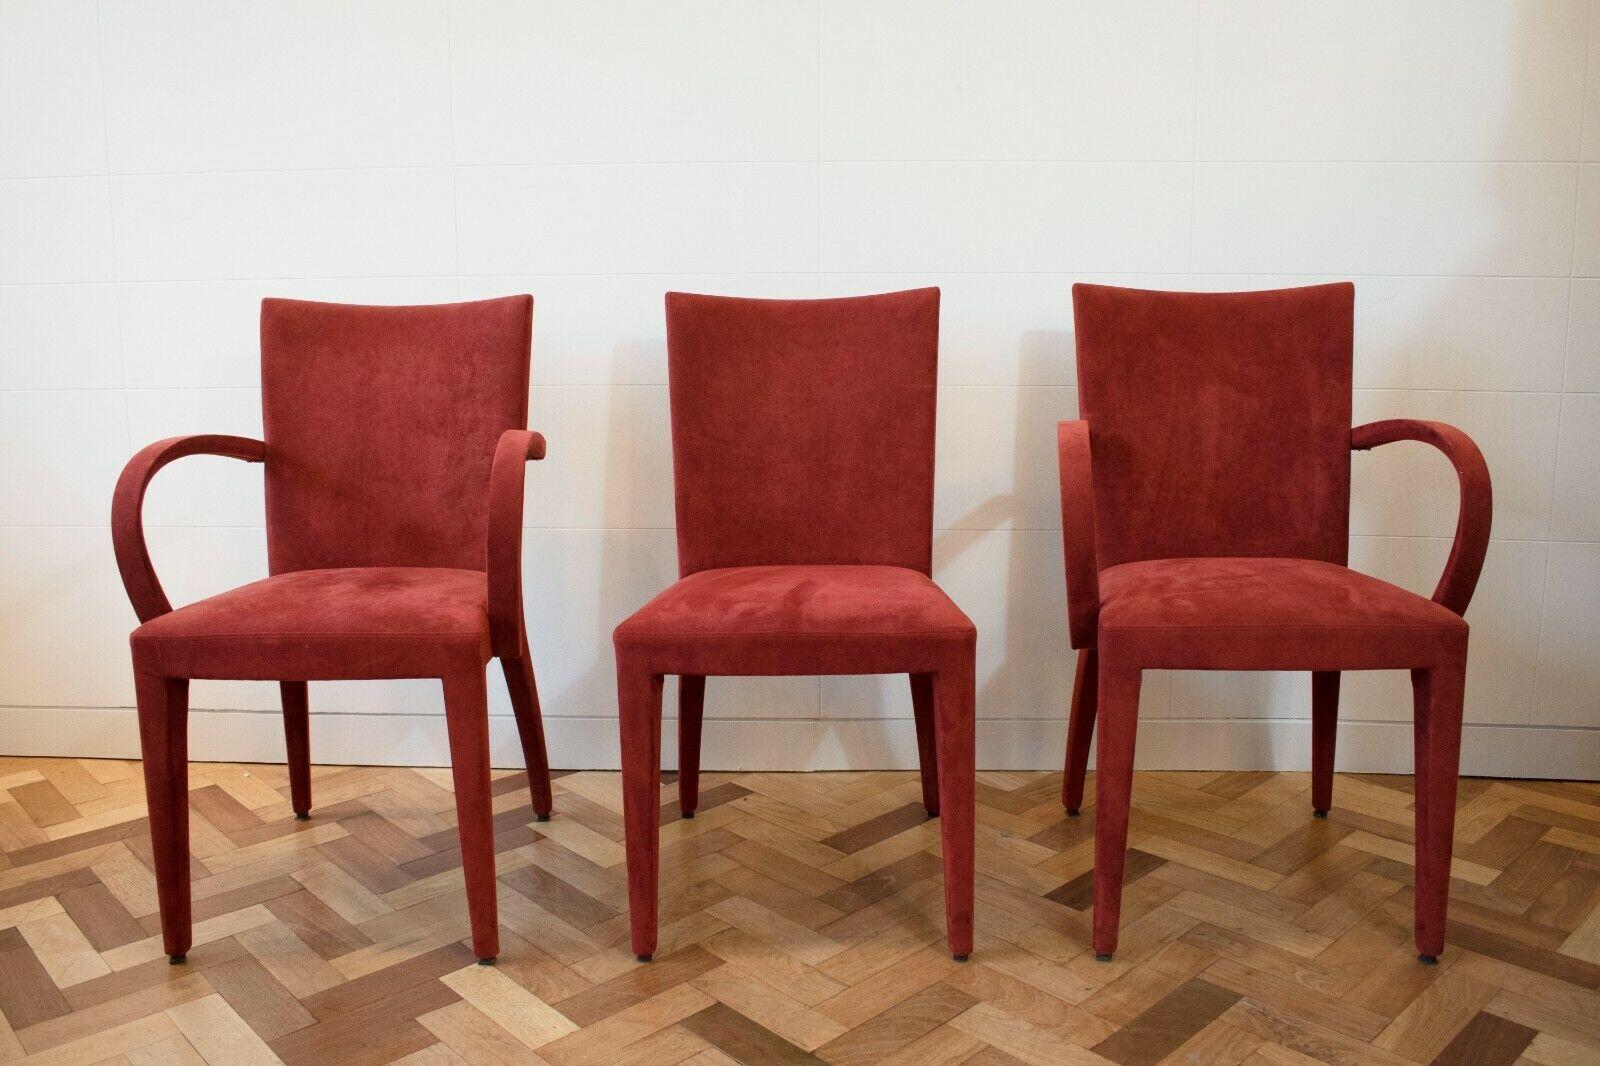 European Set of 6 Roche Bobois Red Suede Dining Chairs